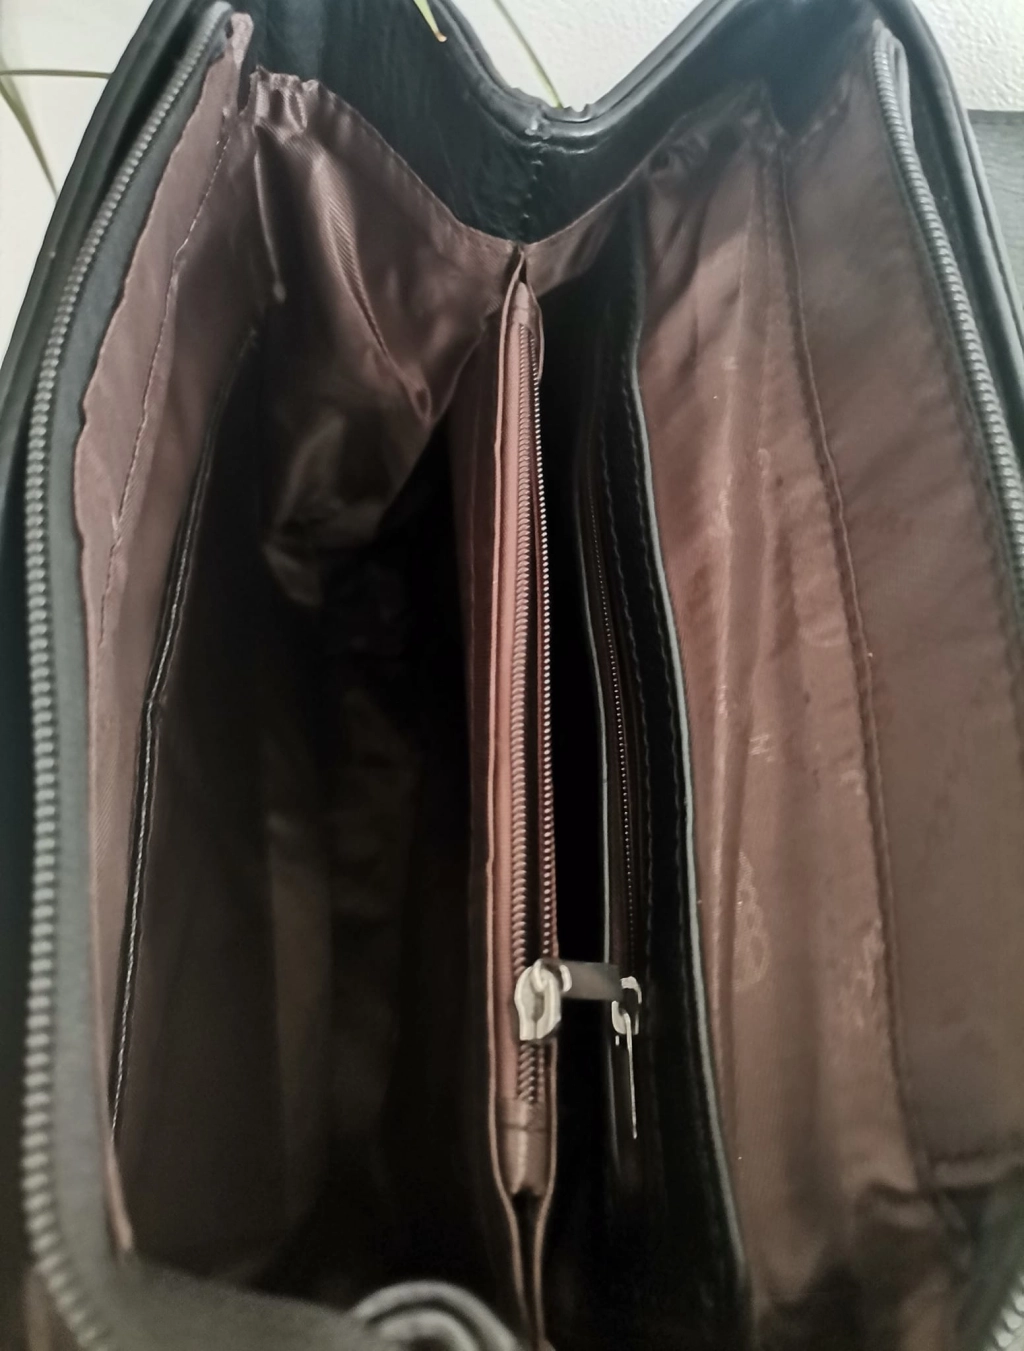 Backpack - bag with metal handle and lid in two colors